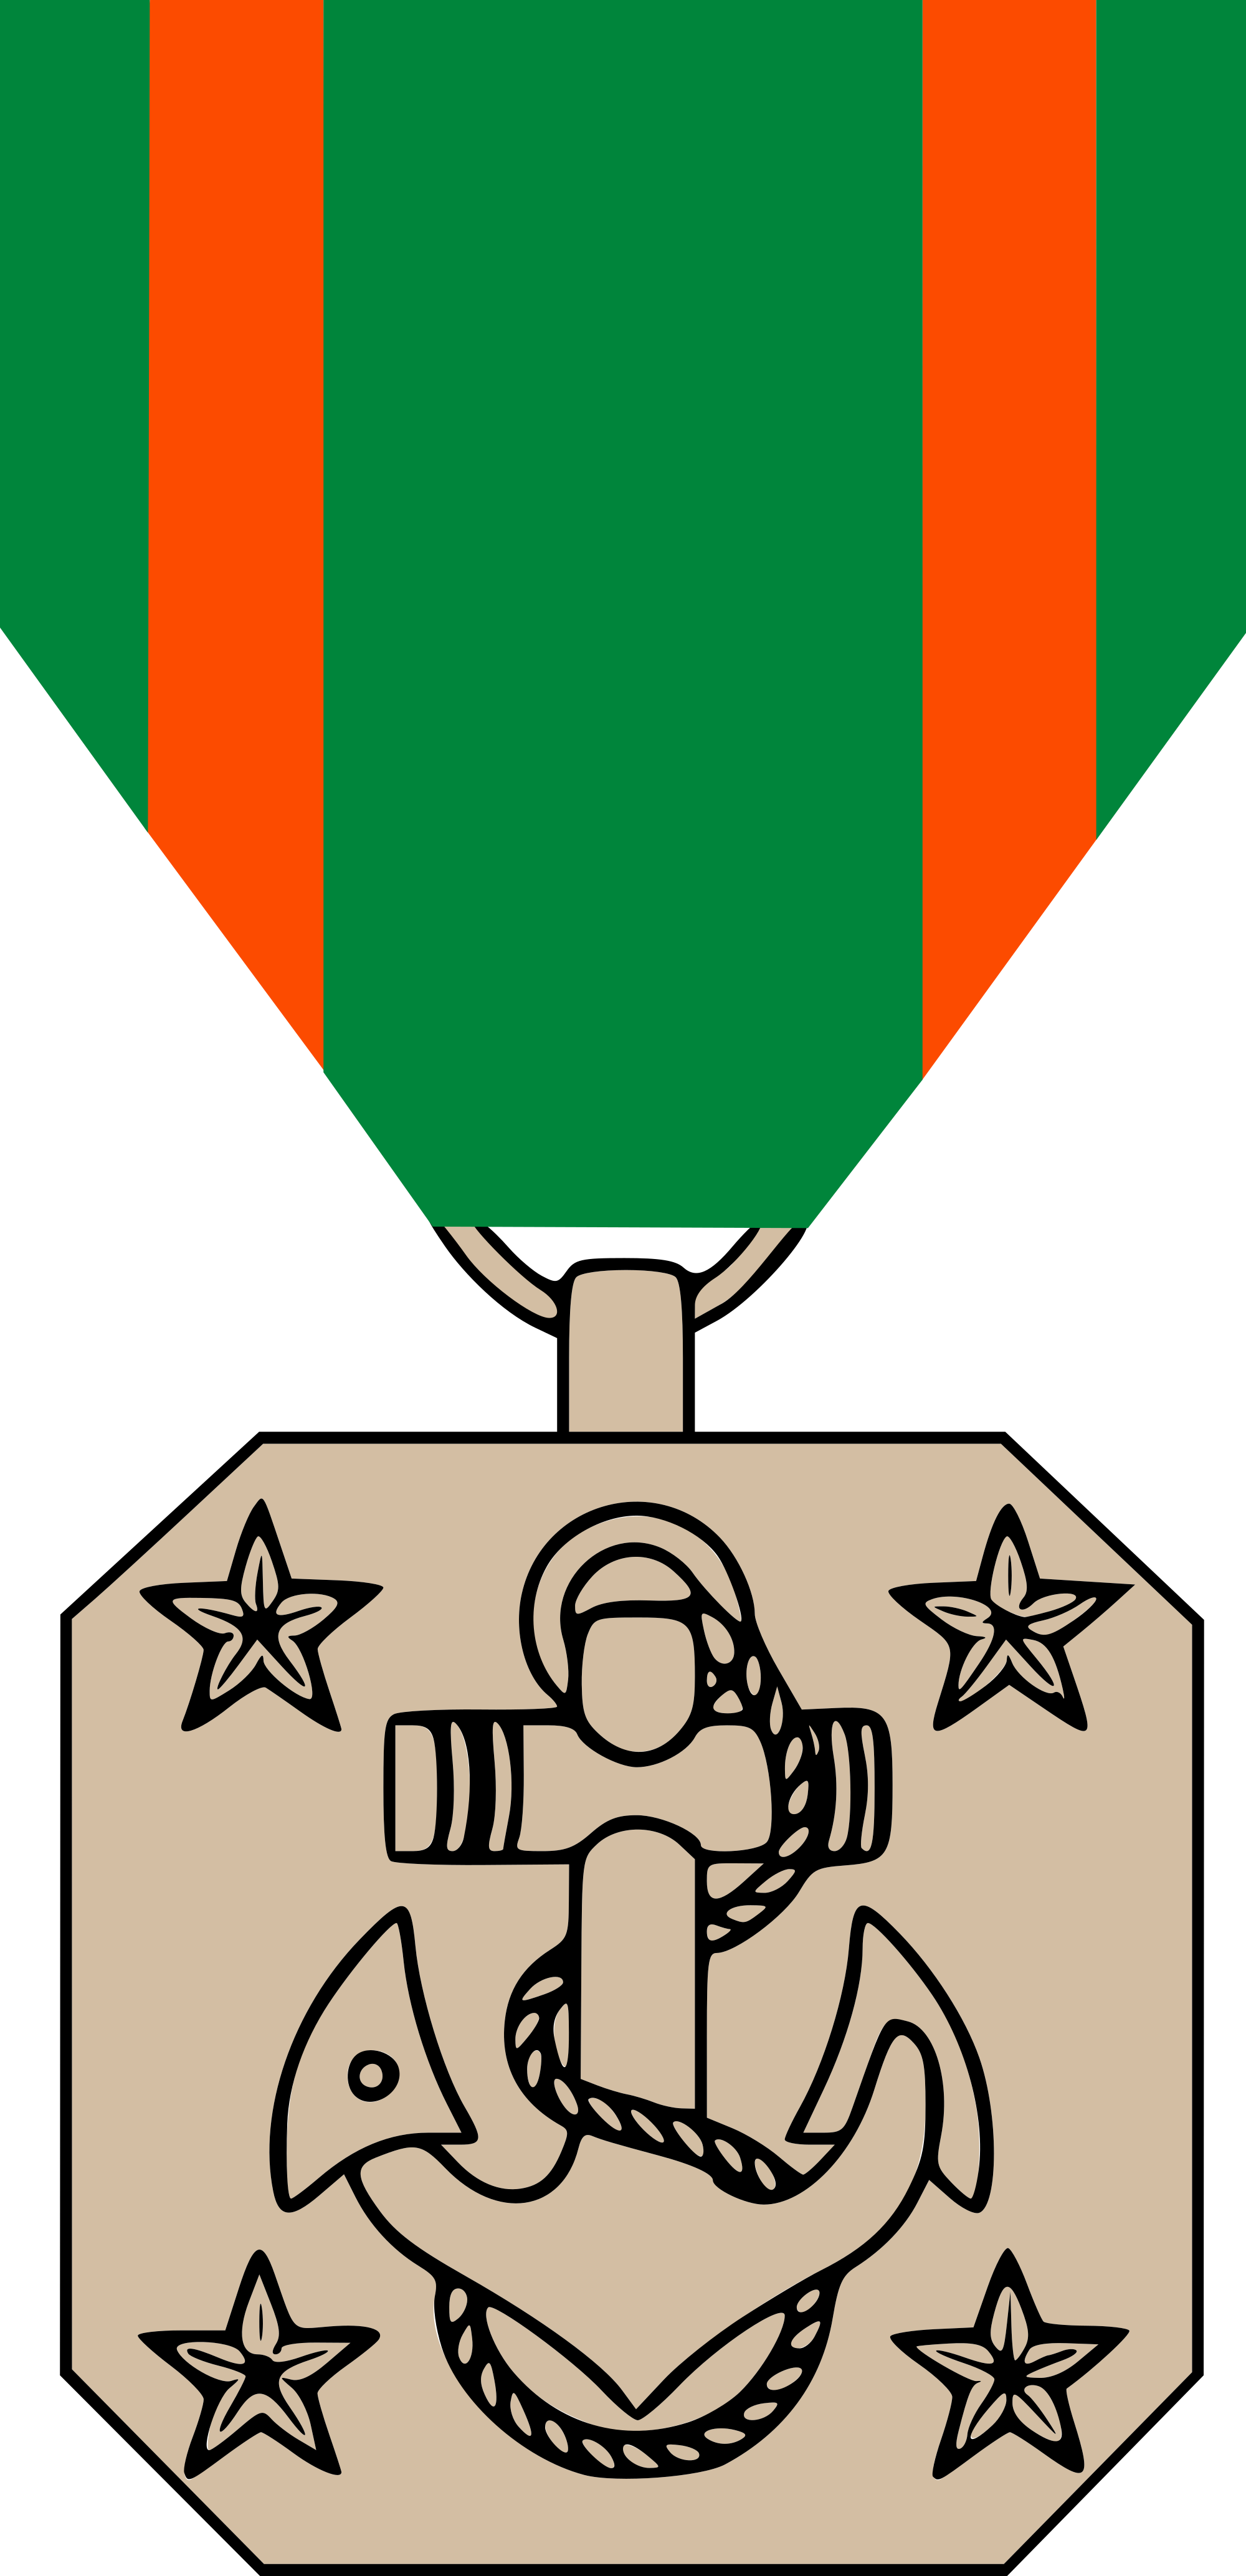 File navy and marine. Medal clipart acheivement